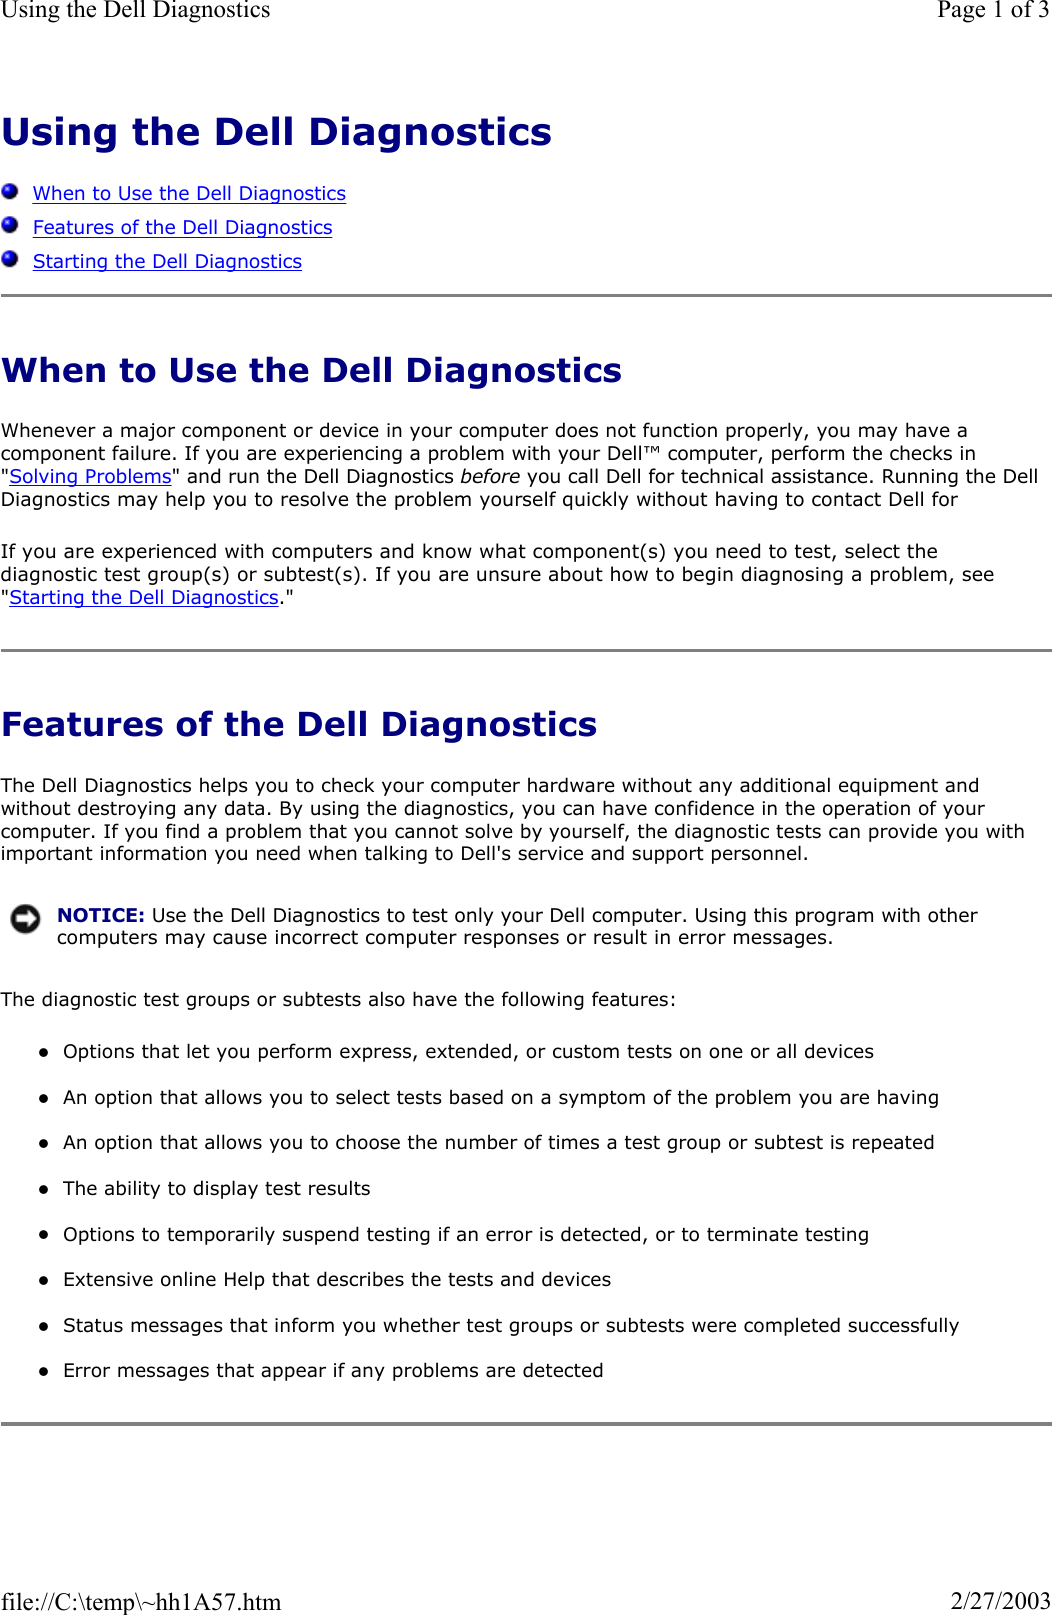 Using the Dell DiagnosticsWhen to Use the Dell DiagnosticsFeatures of the Dell DiagnosticsStarting the Dell DiagnosticsWhen to Use the Dell Diagnostics Whenever a major component or device in your computer does not function properly, you may have a component failure. If you are experiencing a problem with your Dell™ computer, perform the checks in &quot;Solving Problems&quot; and run the Dell Diagnostics before you call Dell for technical assistance. Running the Dell Diagnostics may help you to resolve the problem yourself quickly without having to contact Dell for If you are experienced with computers and know what component(s) you need to test, select the diagnostic test group(s) or subtest(s). If you are unsure about how to begin diagnosing a problem, see &quot;Starting the Dell Diagnostics.&quot; Features of the Dell Diagnostics The Dell Diagnostics helps you to check your computer hardware without any additional equipment and without destroying any data. By using the diagnostics, you can have confidence in the operation of your computer. If you find a problem that you cannot solve by yourself, the diagnostic tests can provide you with important information you need when talking to Dell&apos;s service and support personnel. The diagnostic test groups or subtests also have the following features: zOptions that let you perform express, extended, or custom tests on one or all devices zAn option that allows you to select tests based on a symptom of the problem you are having zAn option that allows you to choose the number of times a test group or subtest is repeated zThe ability to display test results zOptions to temporarily suspend testing if an error is detected, or to terminate testing zExtensive online Help that describes the tests and devices zStatus messages that inform you whether test groups or subtests were completed successfully zError messages that appear if any problems are detected NOTICE: Use the Dell Diagnostics to test only your Dell computer. Using this program with other computers may cause incorrect computer responses or result in error messages.Page 1 of 3Using the Dell Diagnostics2/27/2003file://C:\temp\~hh1A57.htm